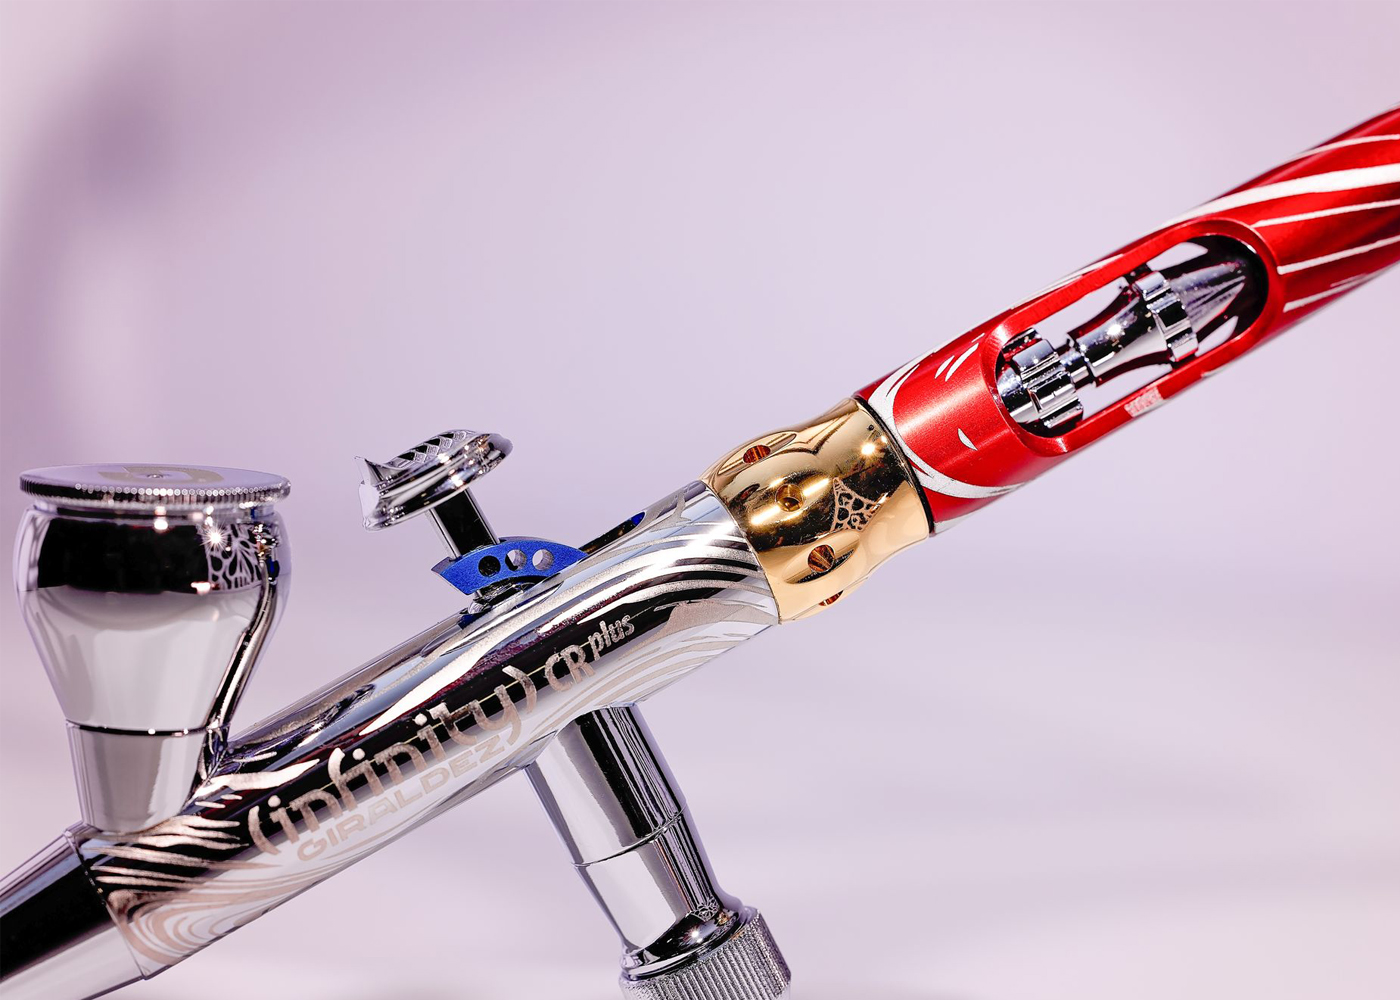 Infinity Giraldez CRplus Airbrush : Harder & Steenbeck : Product Review 